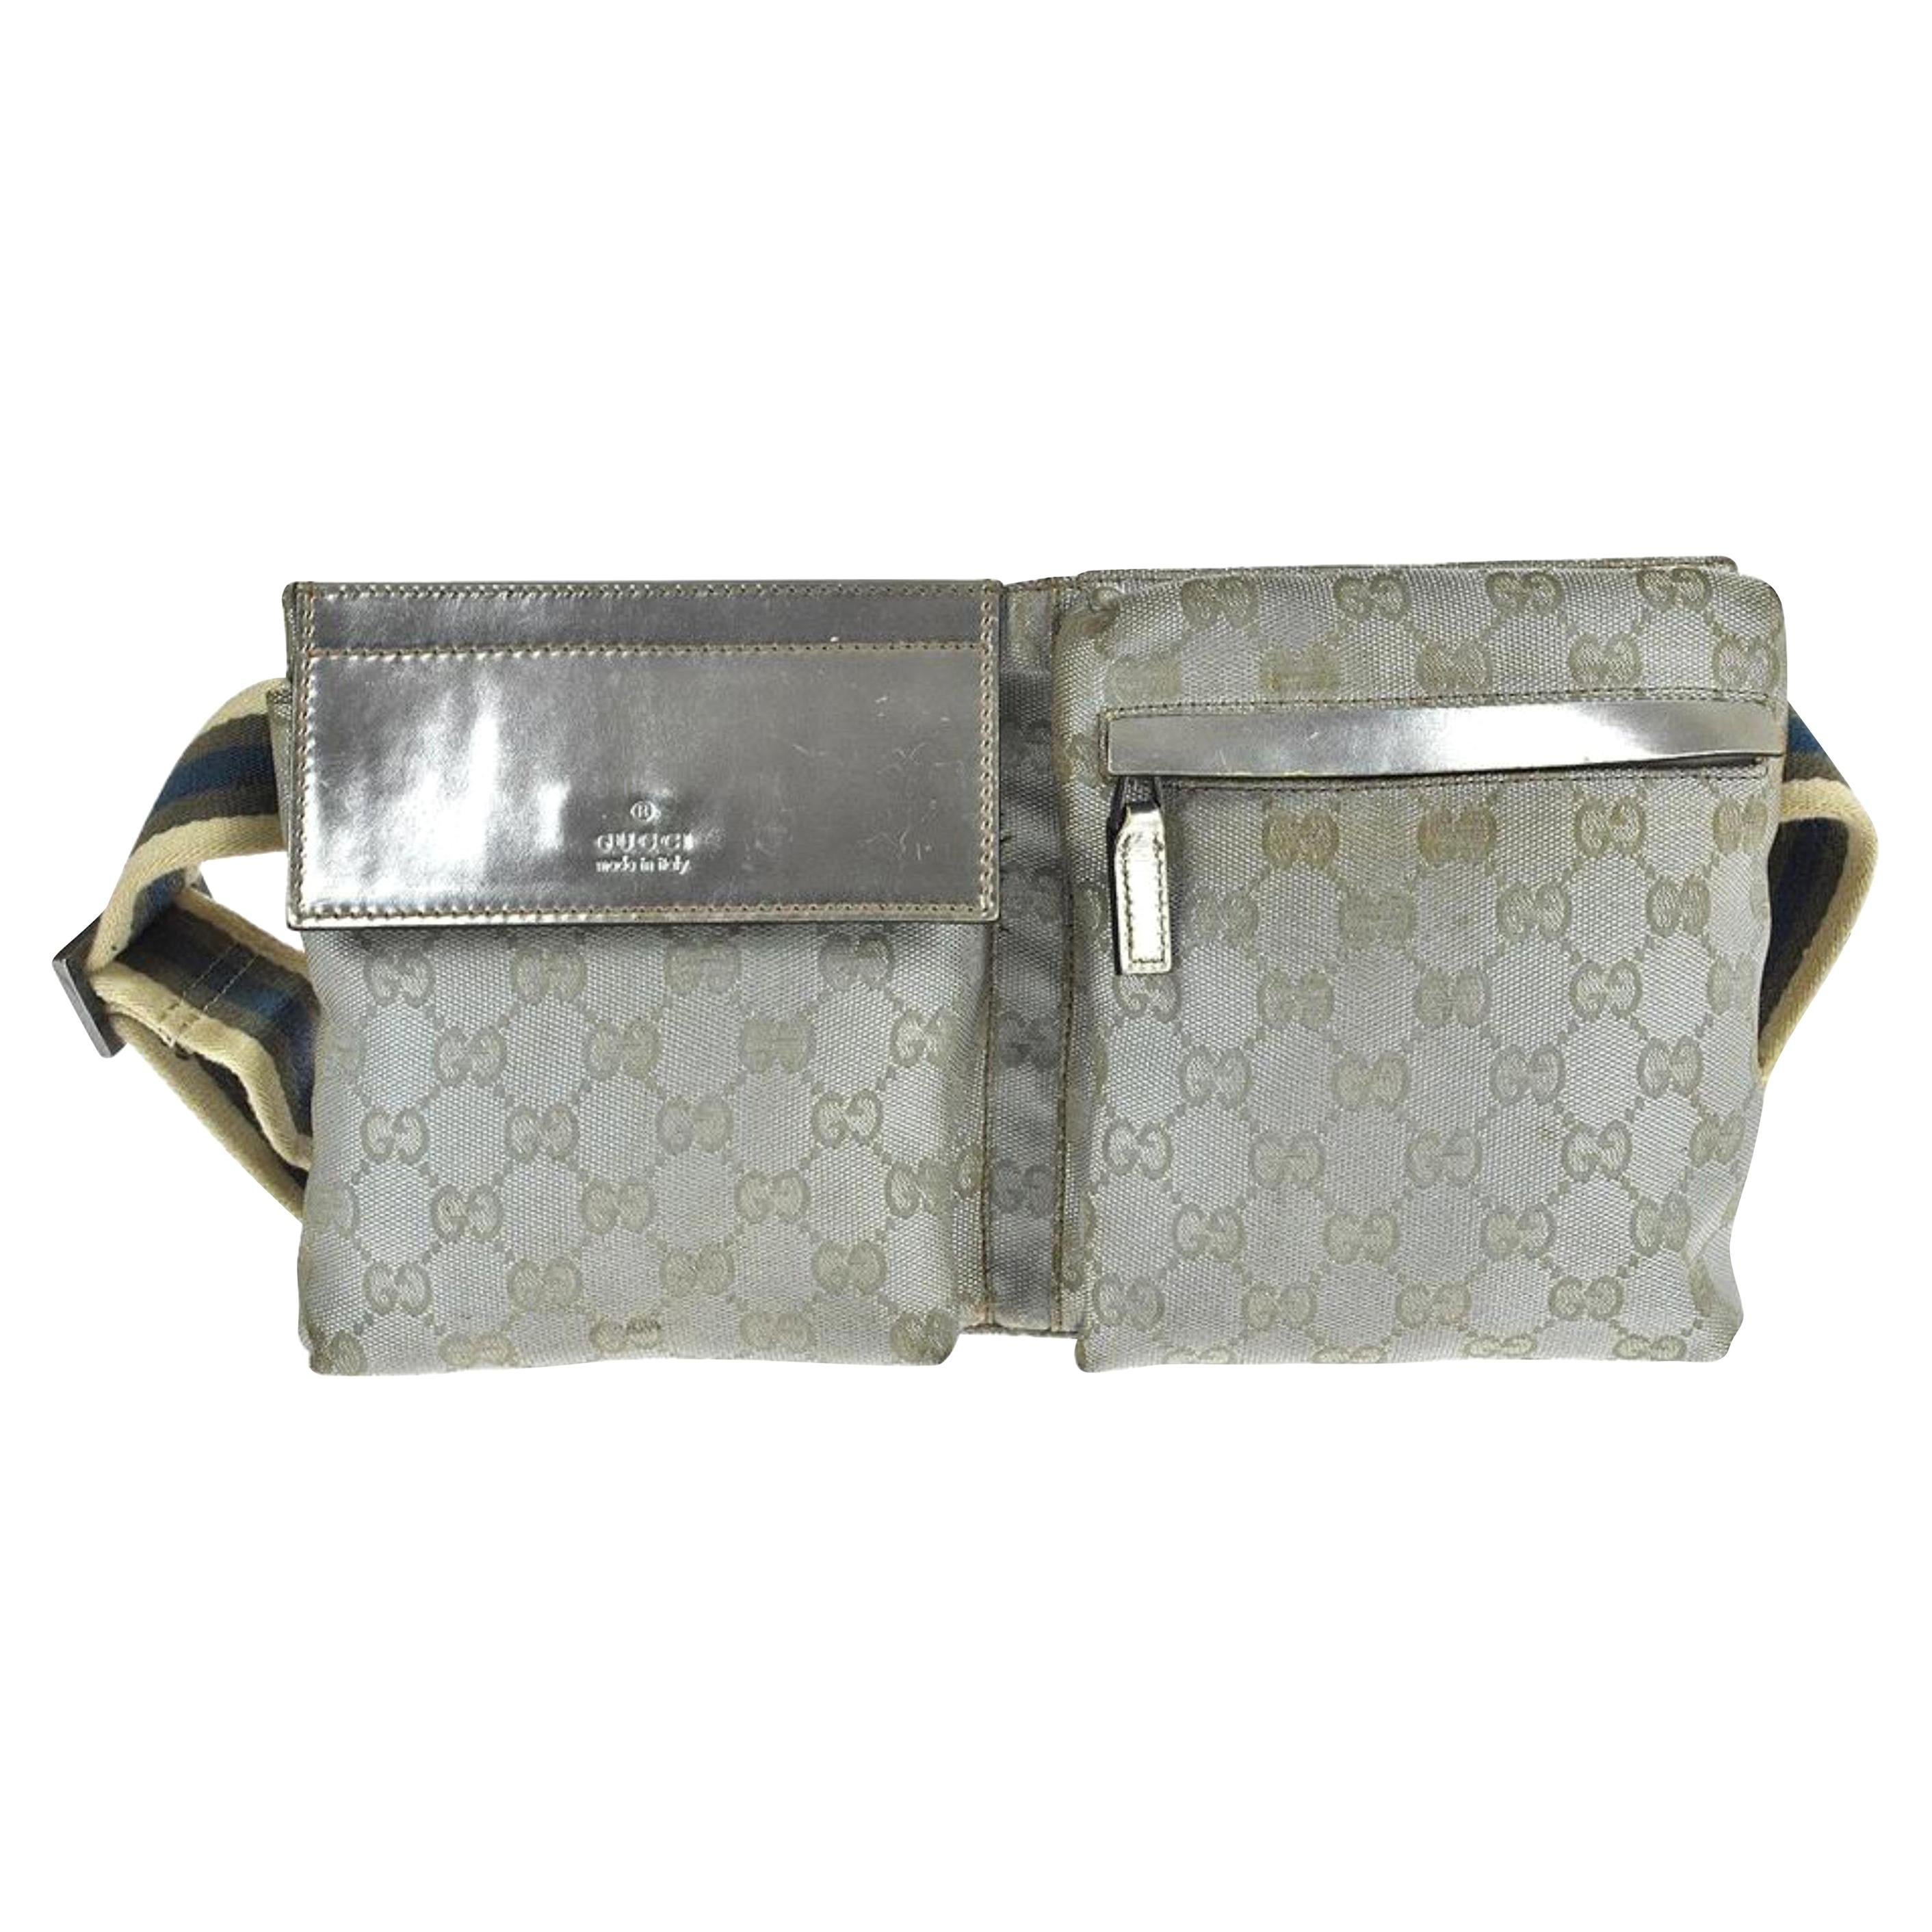 Gucci Monogram Fanny Pack Waist Pouch 868030 Silver Canvas Cross Body Bag For Sale